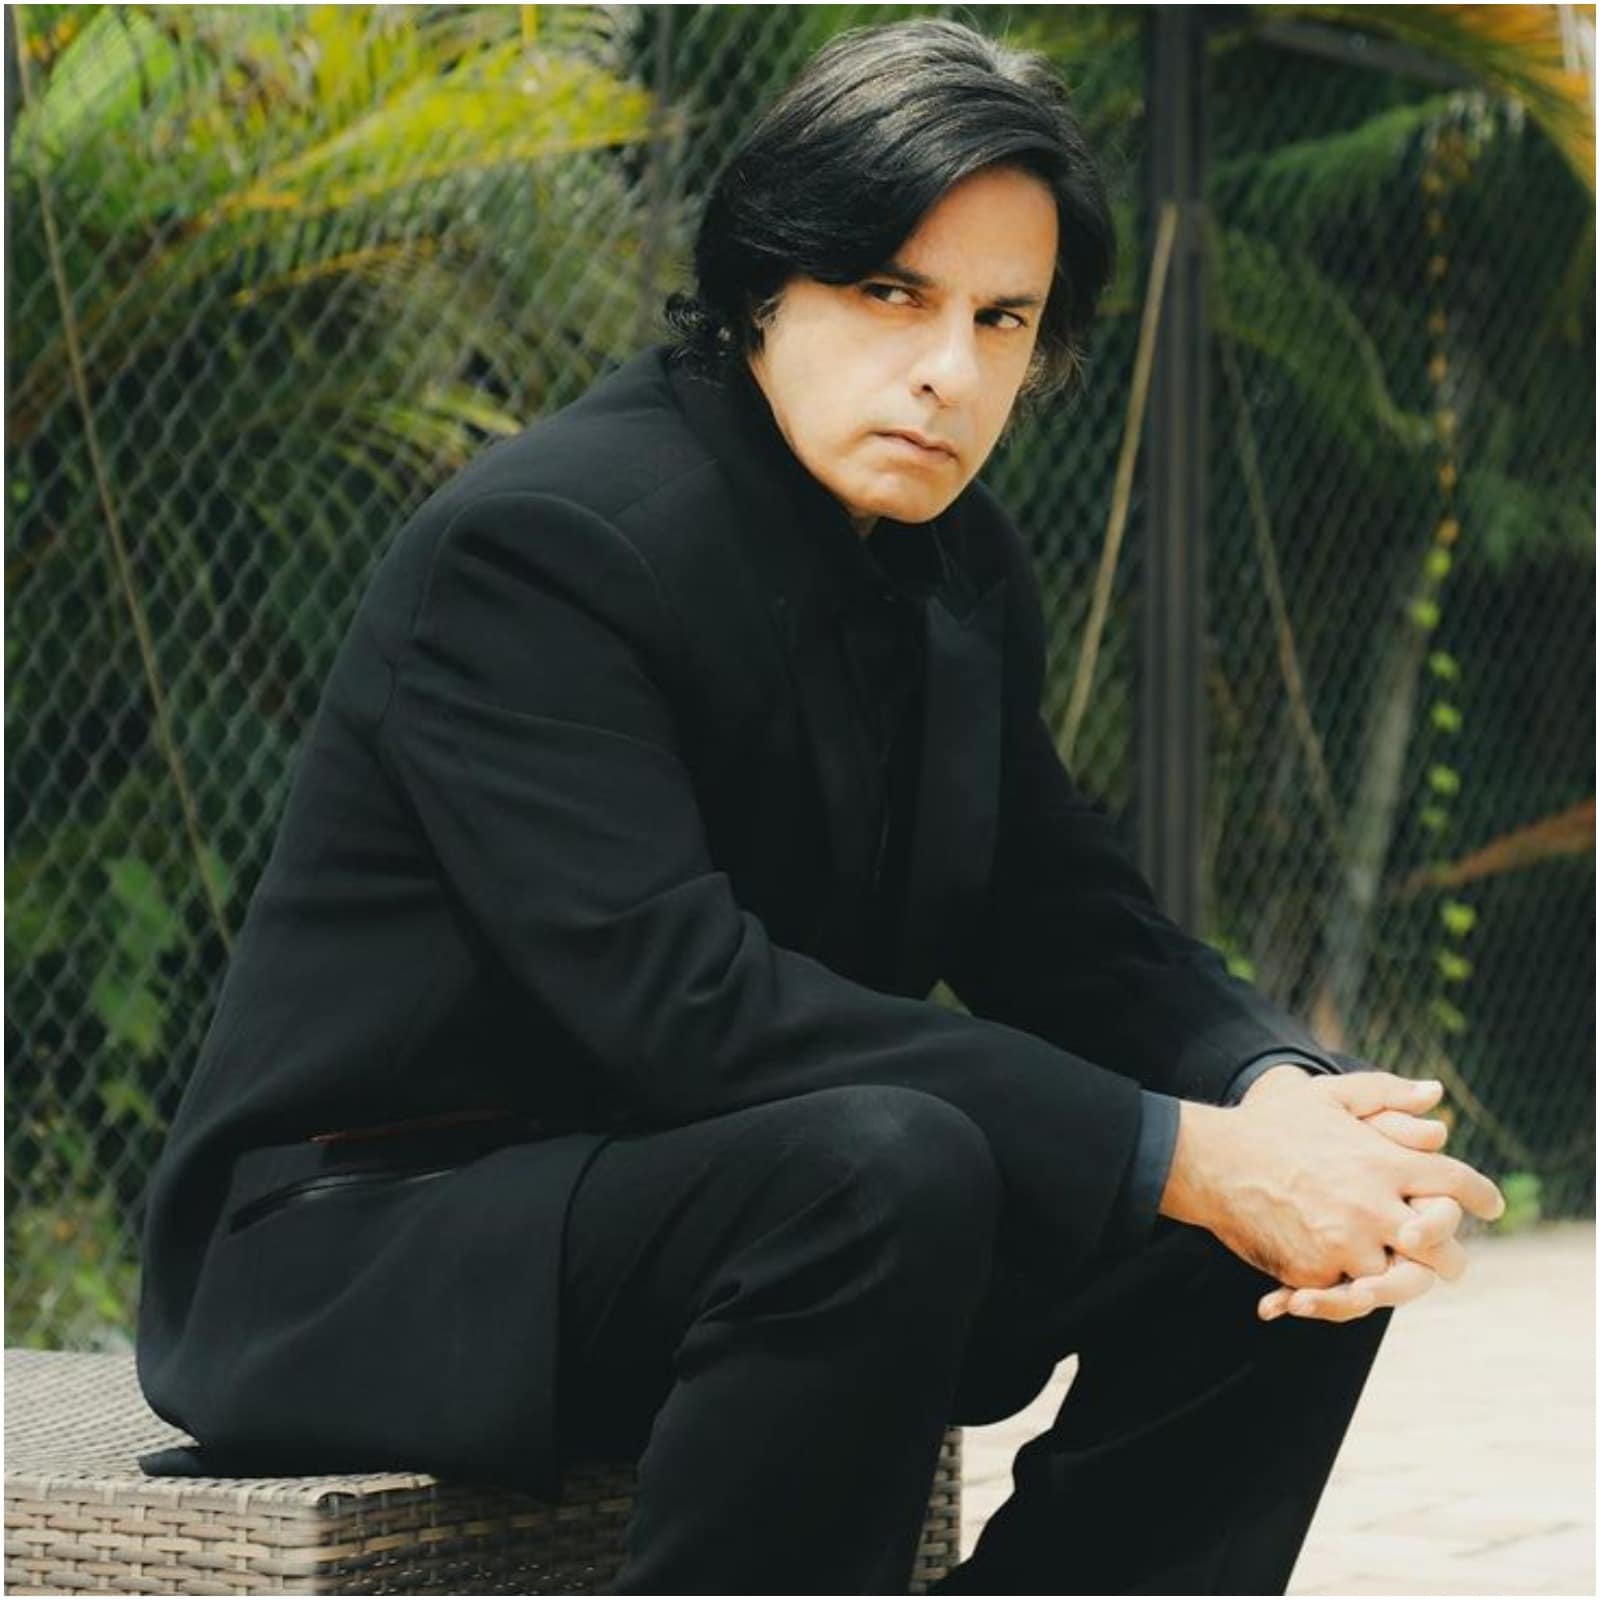 Aashiqui Star Rahul Roy On Why He Walked Away From Bollywood | Aashiqui  Star Rahul Roy On Why He Quit Bollywood - Filmibeat